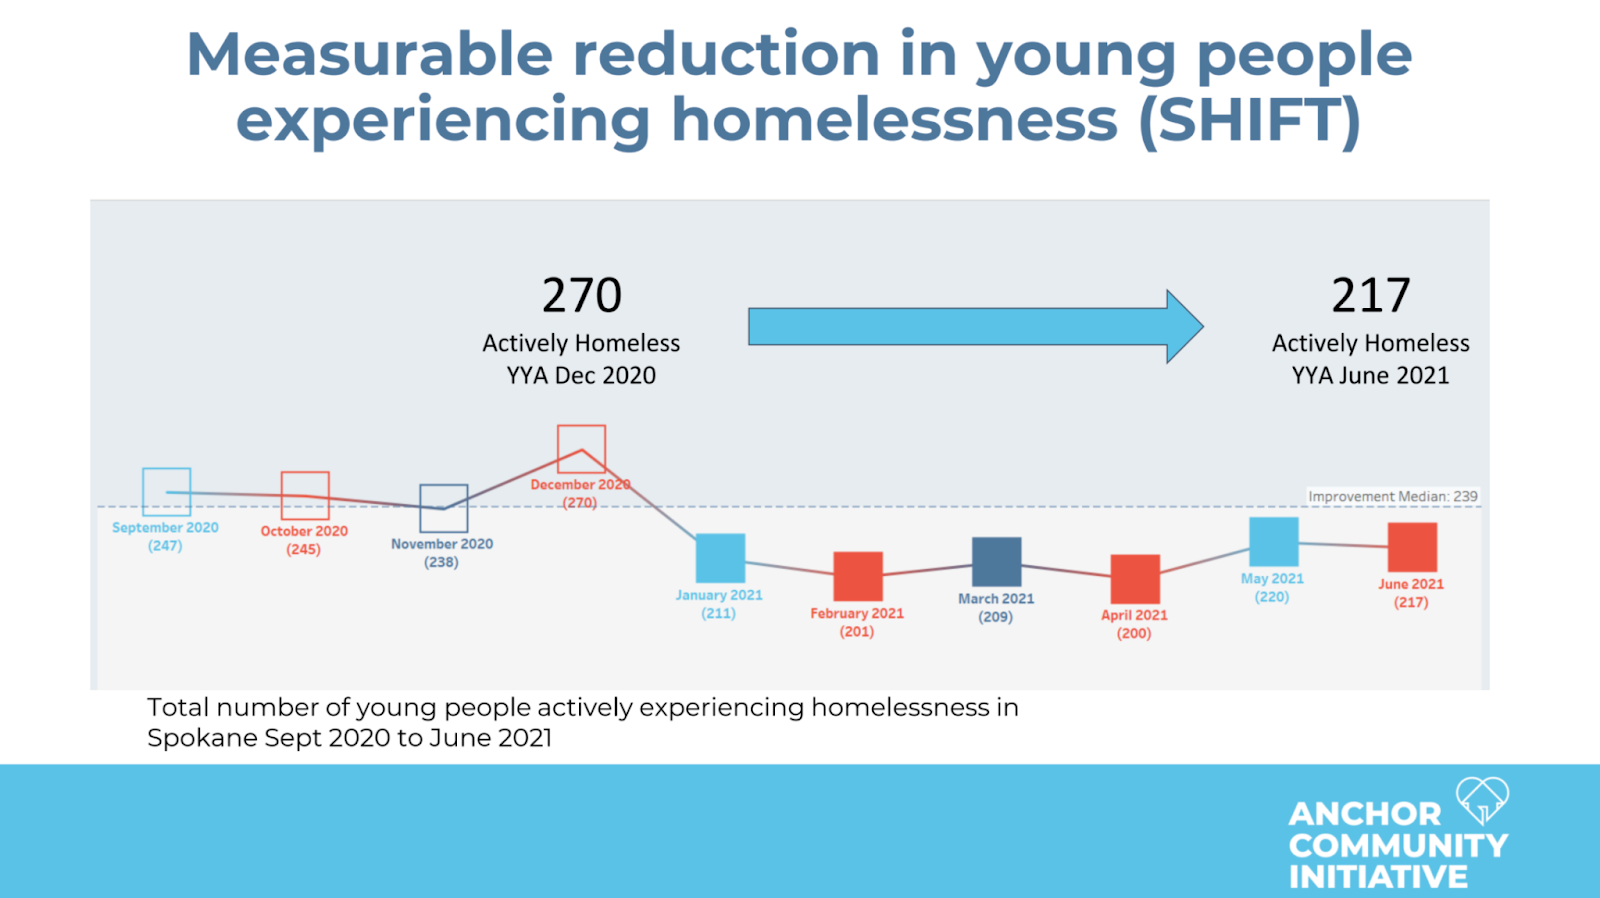 Run chart titled "Measurable reduction in young people experiencing homelessness (SHIFT)"

Total number of young people actively experiencing homelessness in Spokane Sept. 2020 to June 2021.